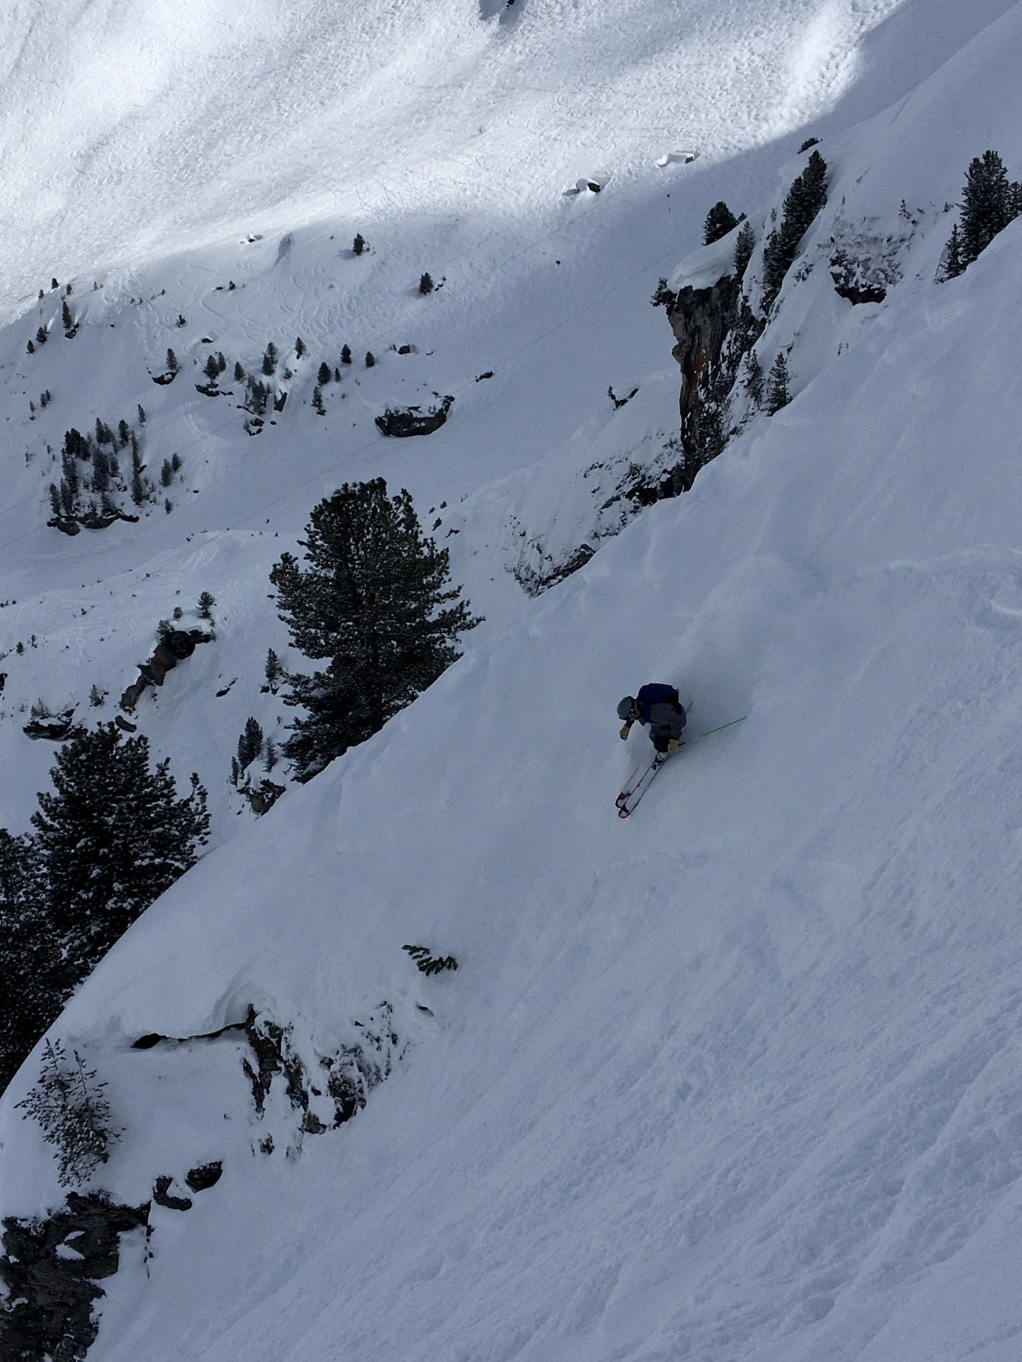 John Mikovits's trip skiing reminds us of the winter months that we are leaving behind us.